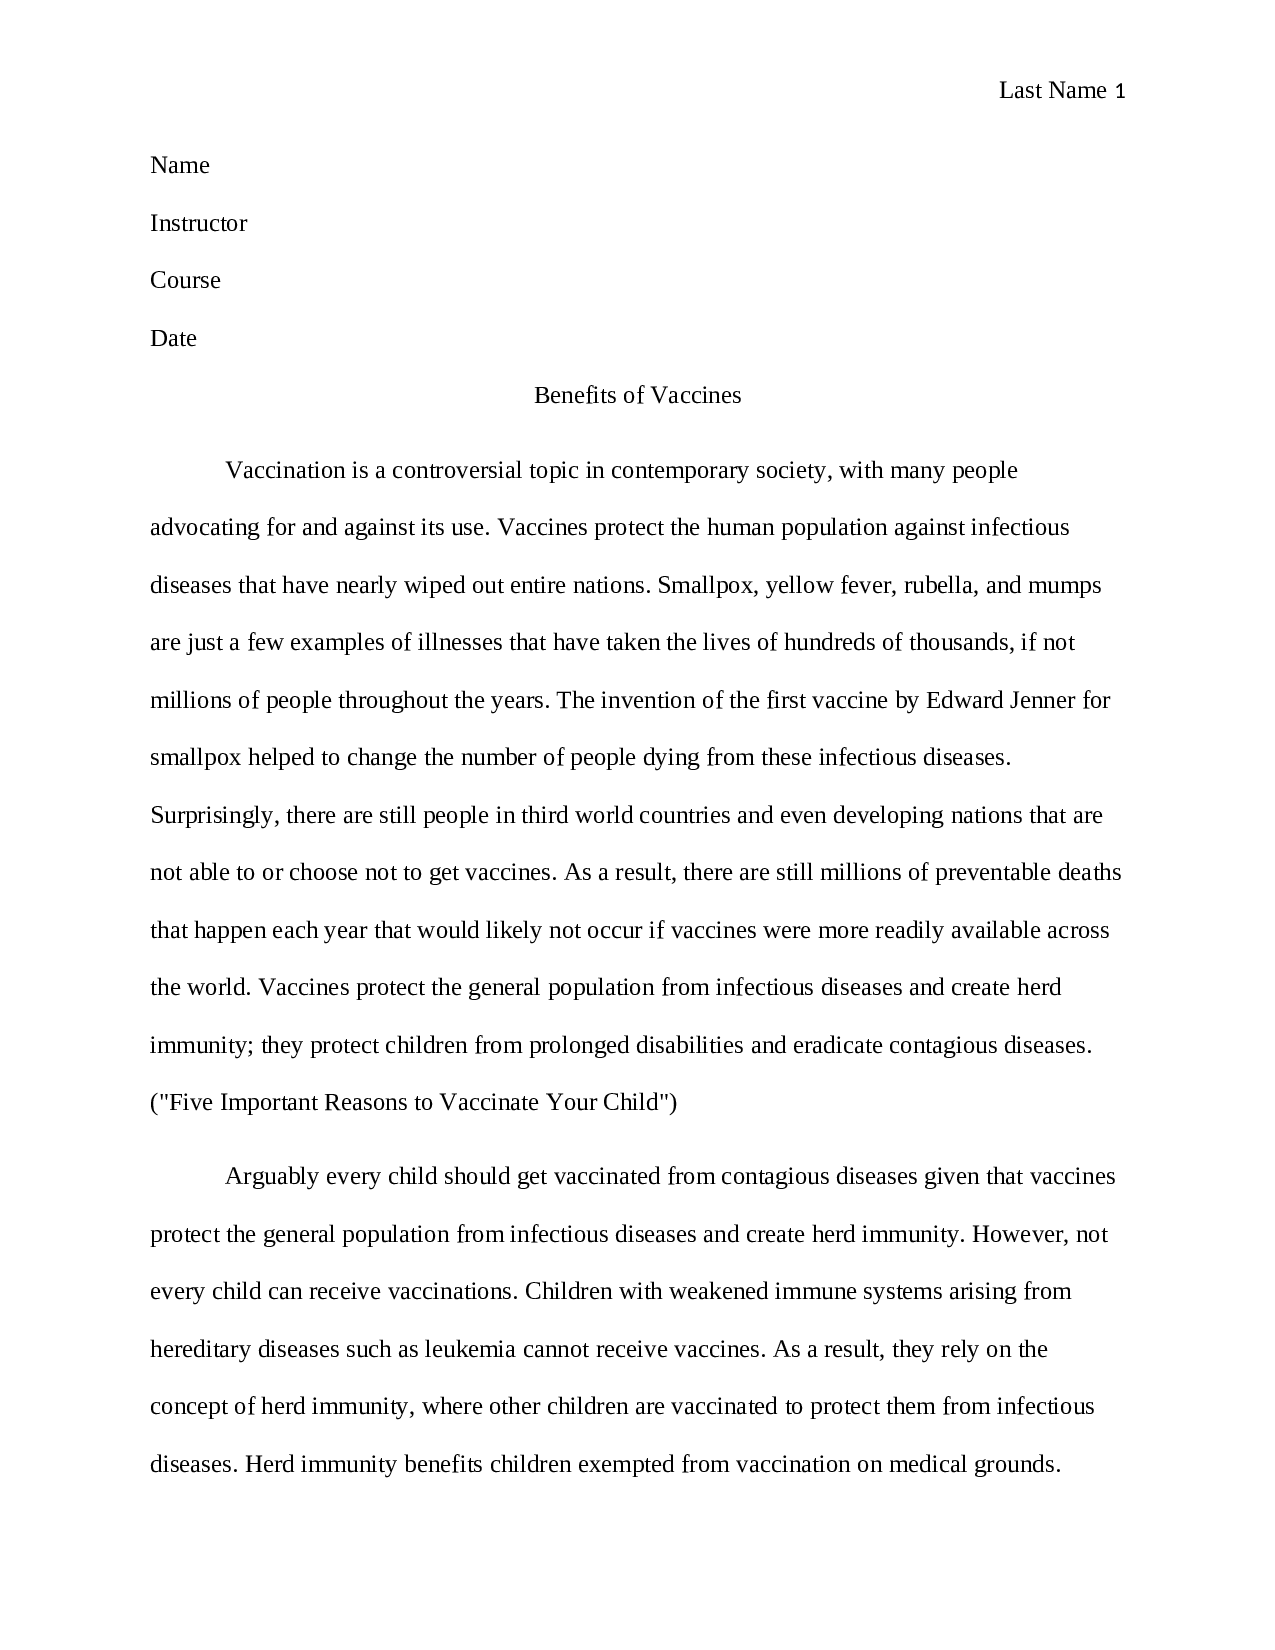 an expository essay on the responsibilities of government